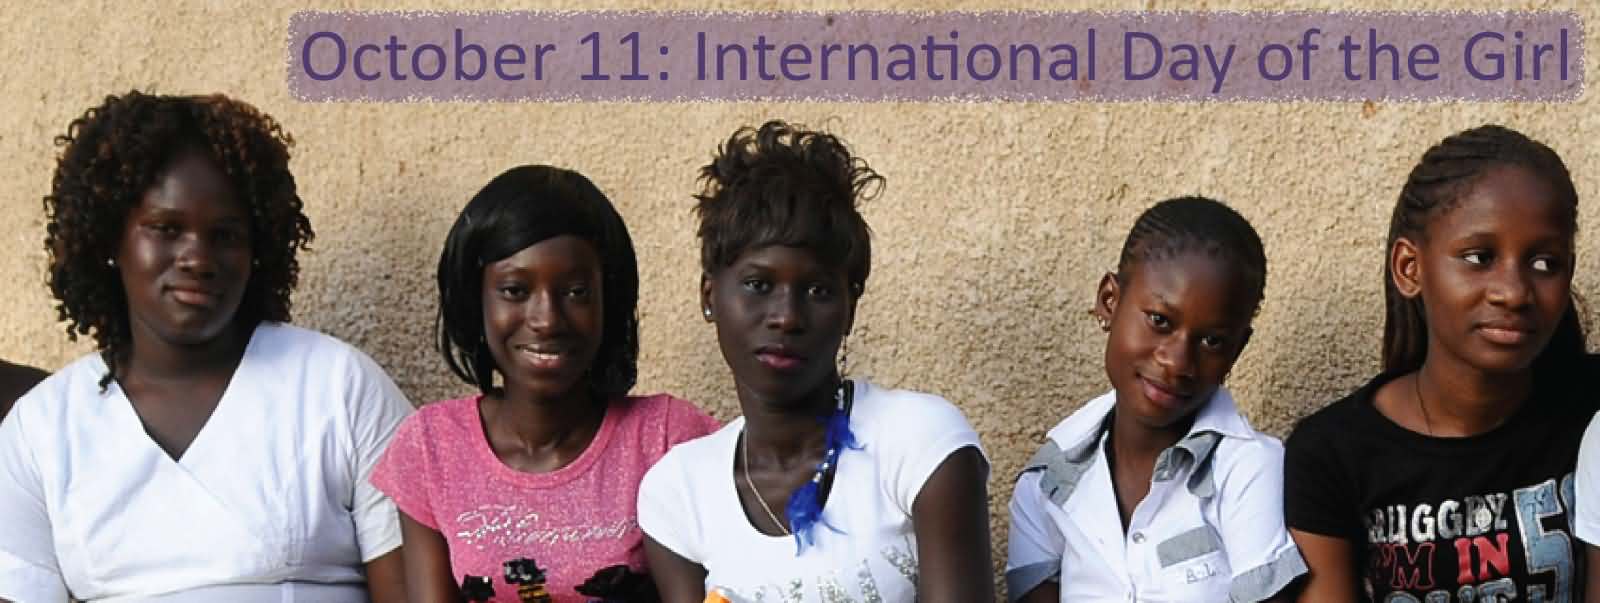 October 11 International Day of the Girl Child Group Of Girls